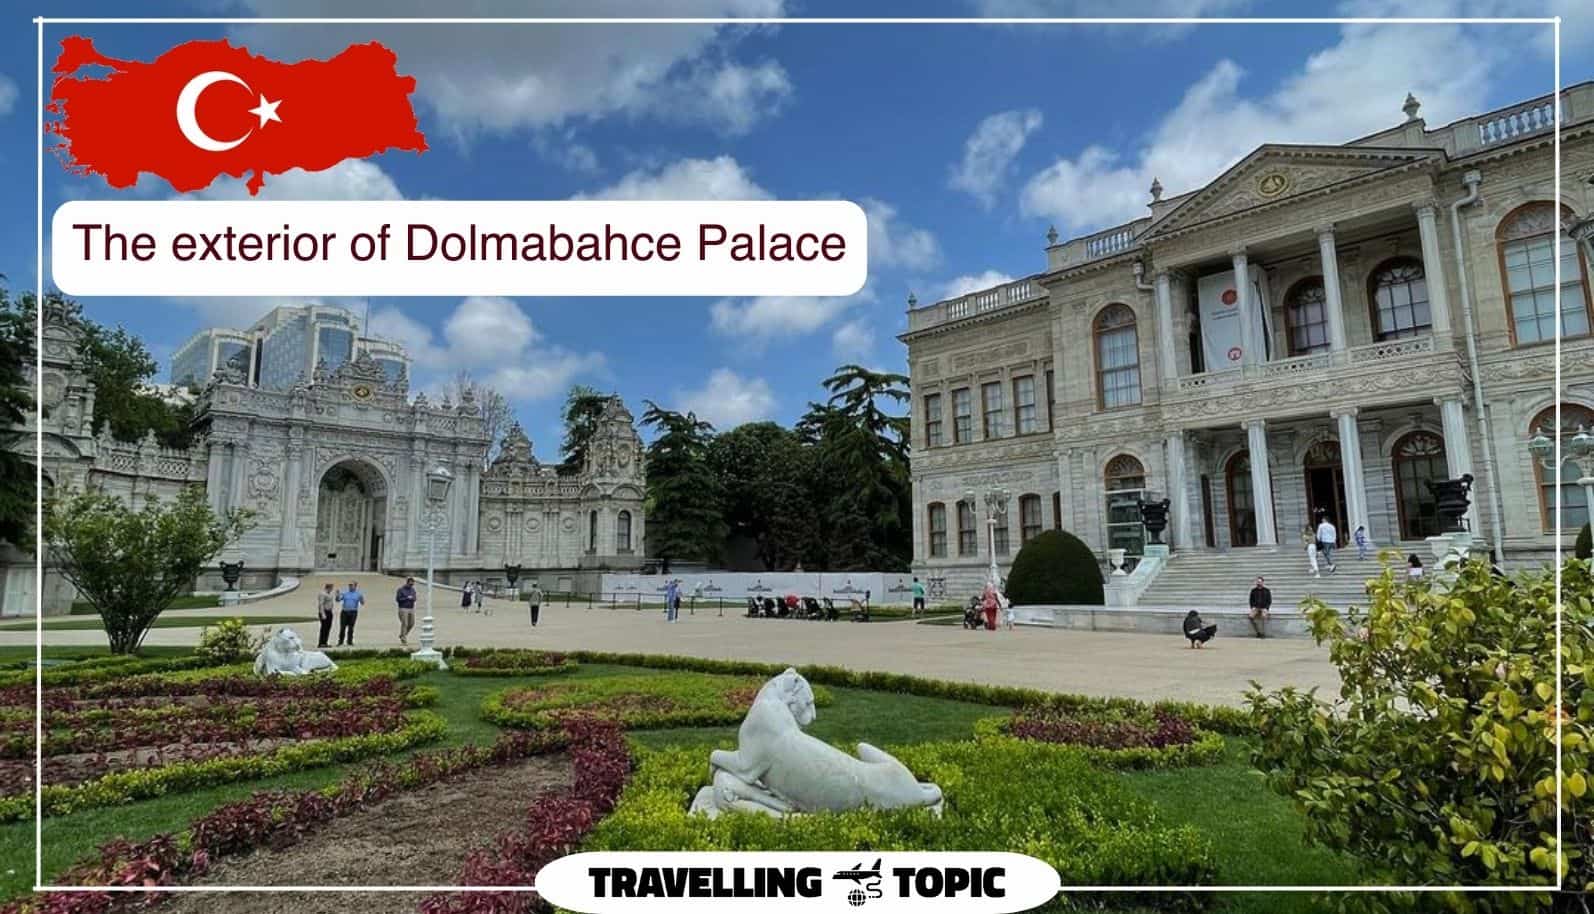 The exterior of Dolmabahce Palace